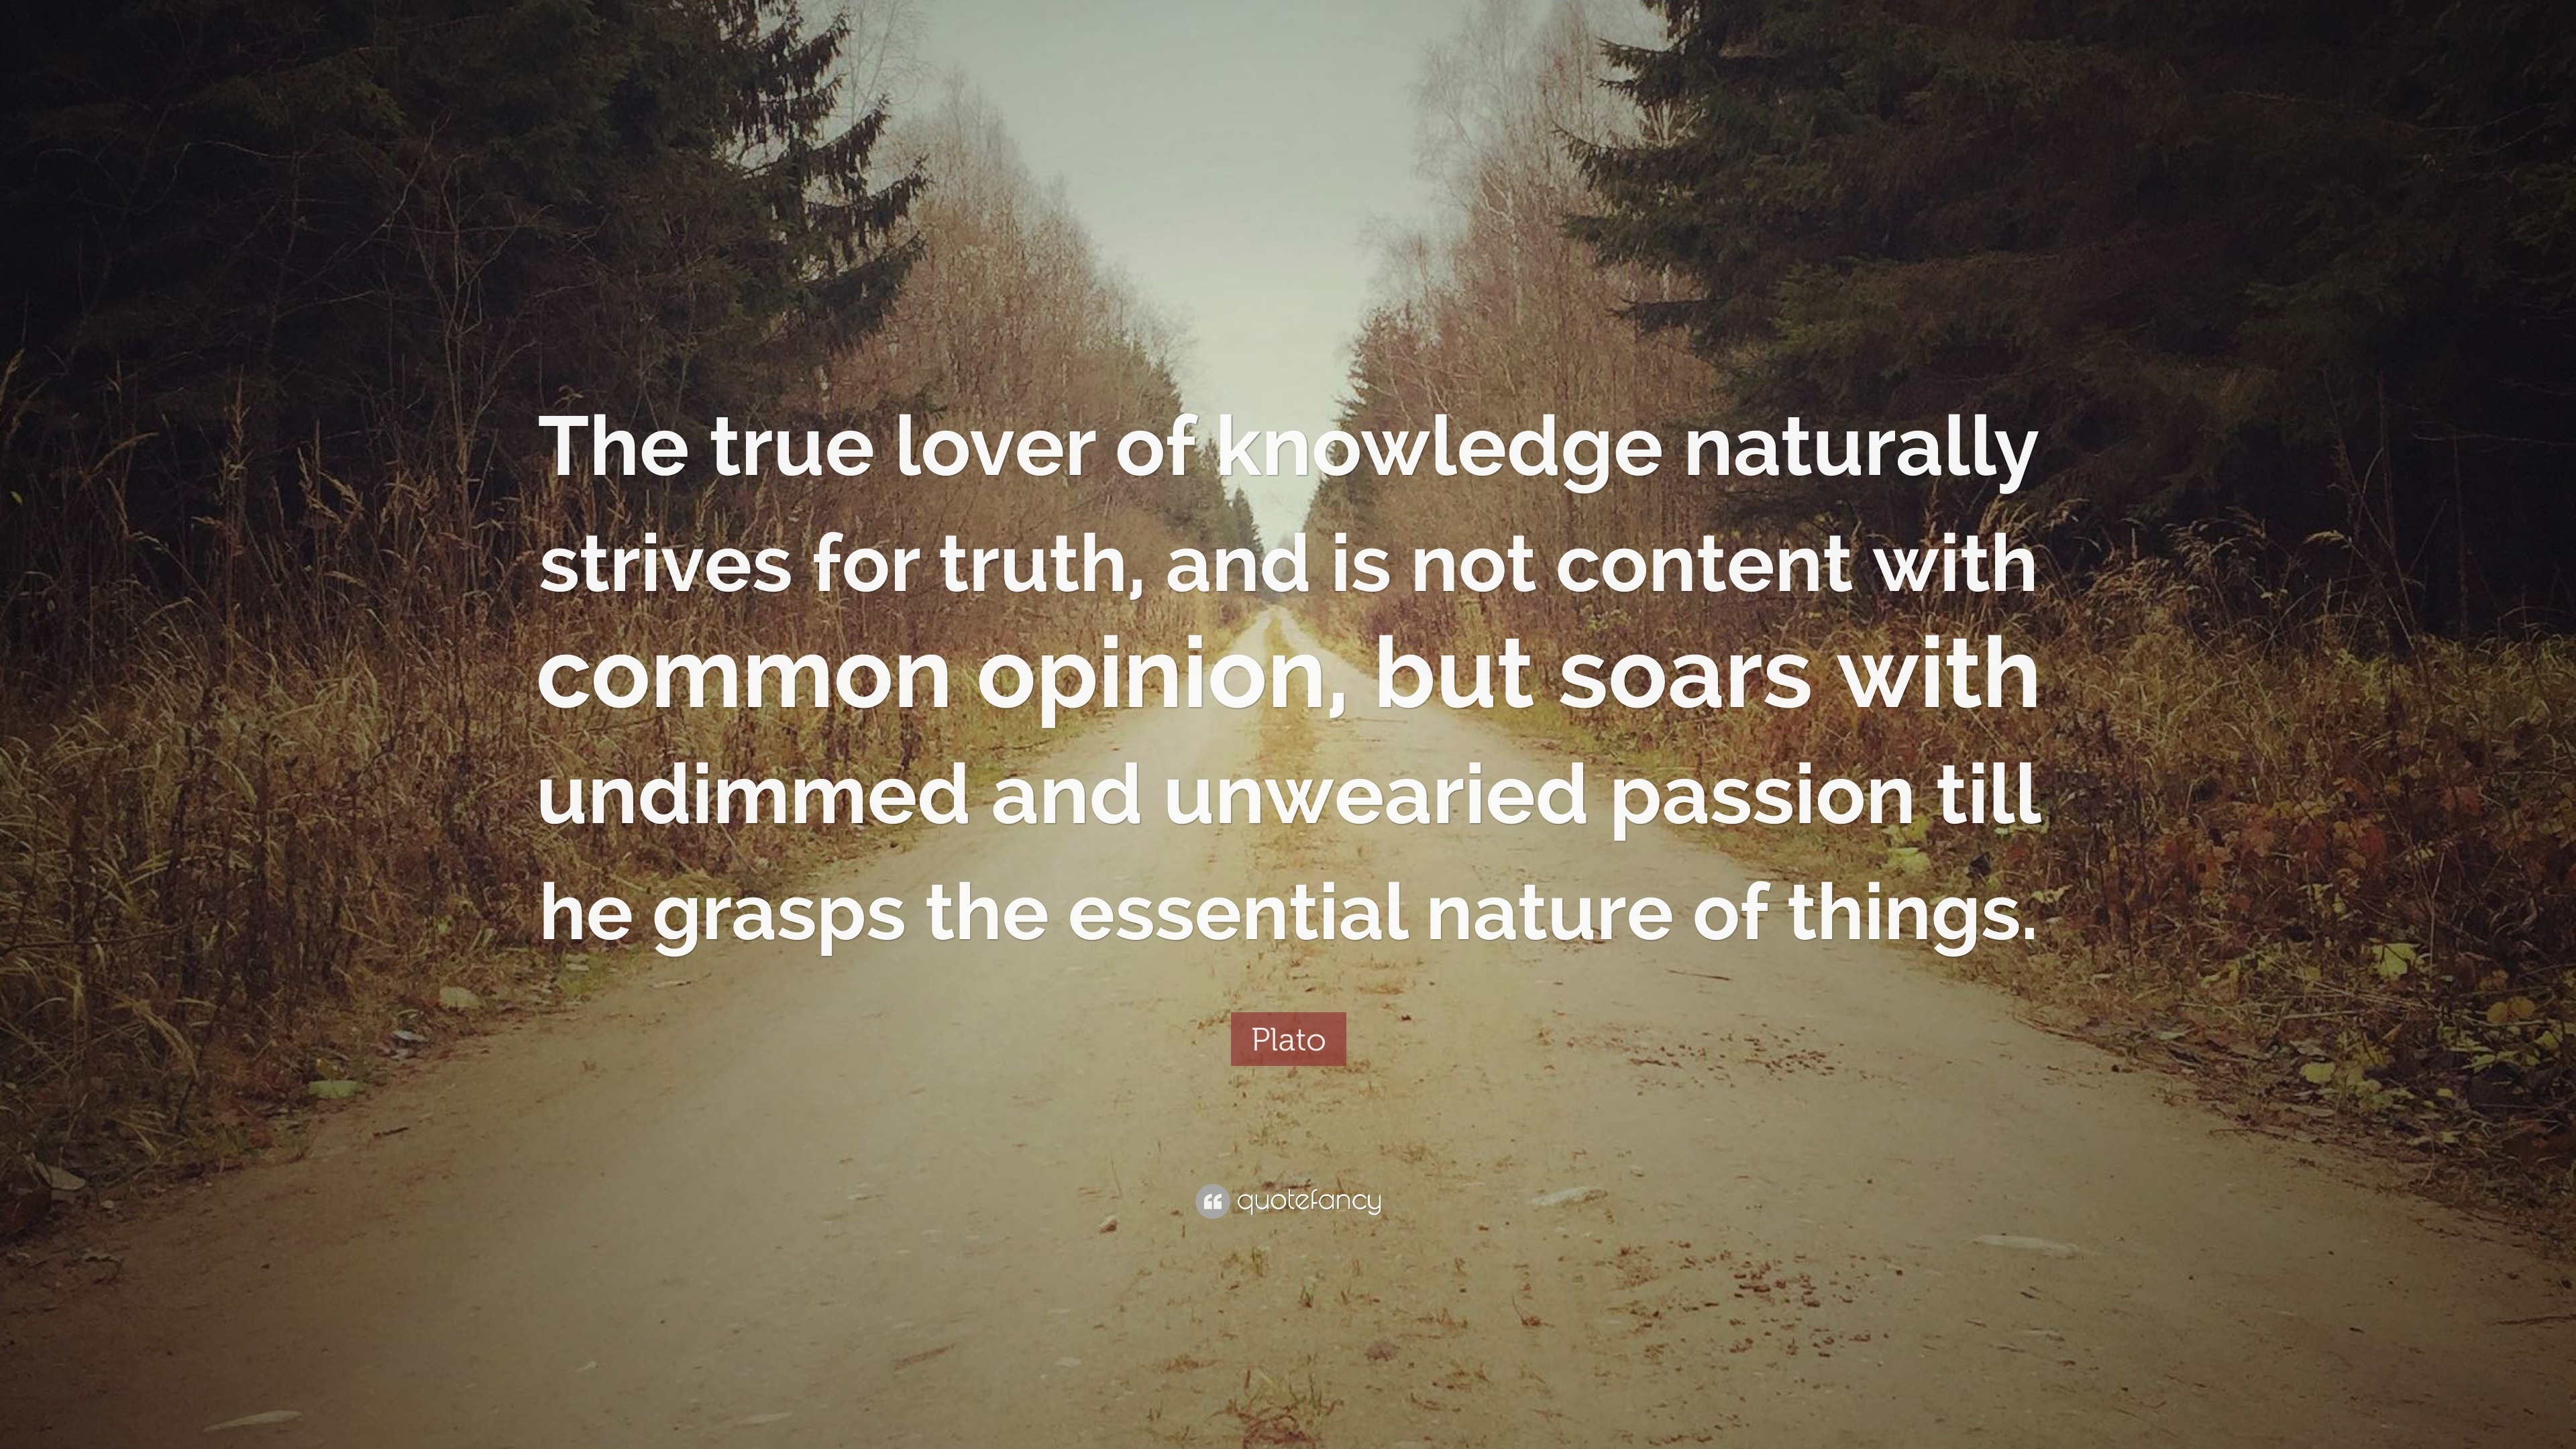 Plato Quote: “The true lover of knowledge naturally strives for truth